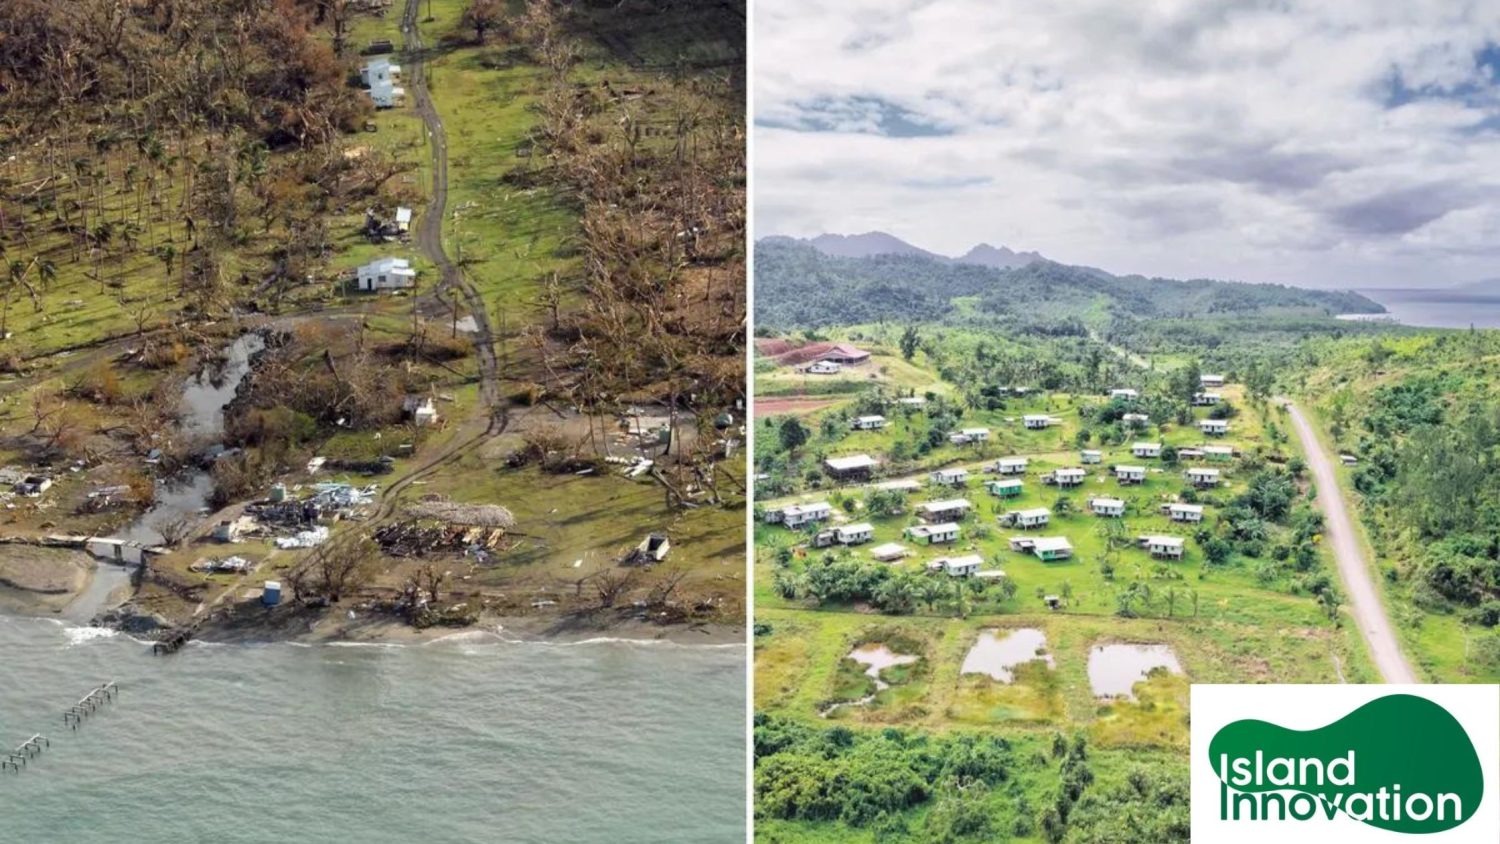 How to move a country: Fiji’s radical plan to escape rising sea levels